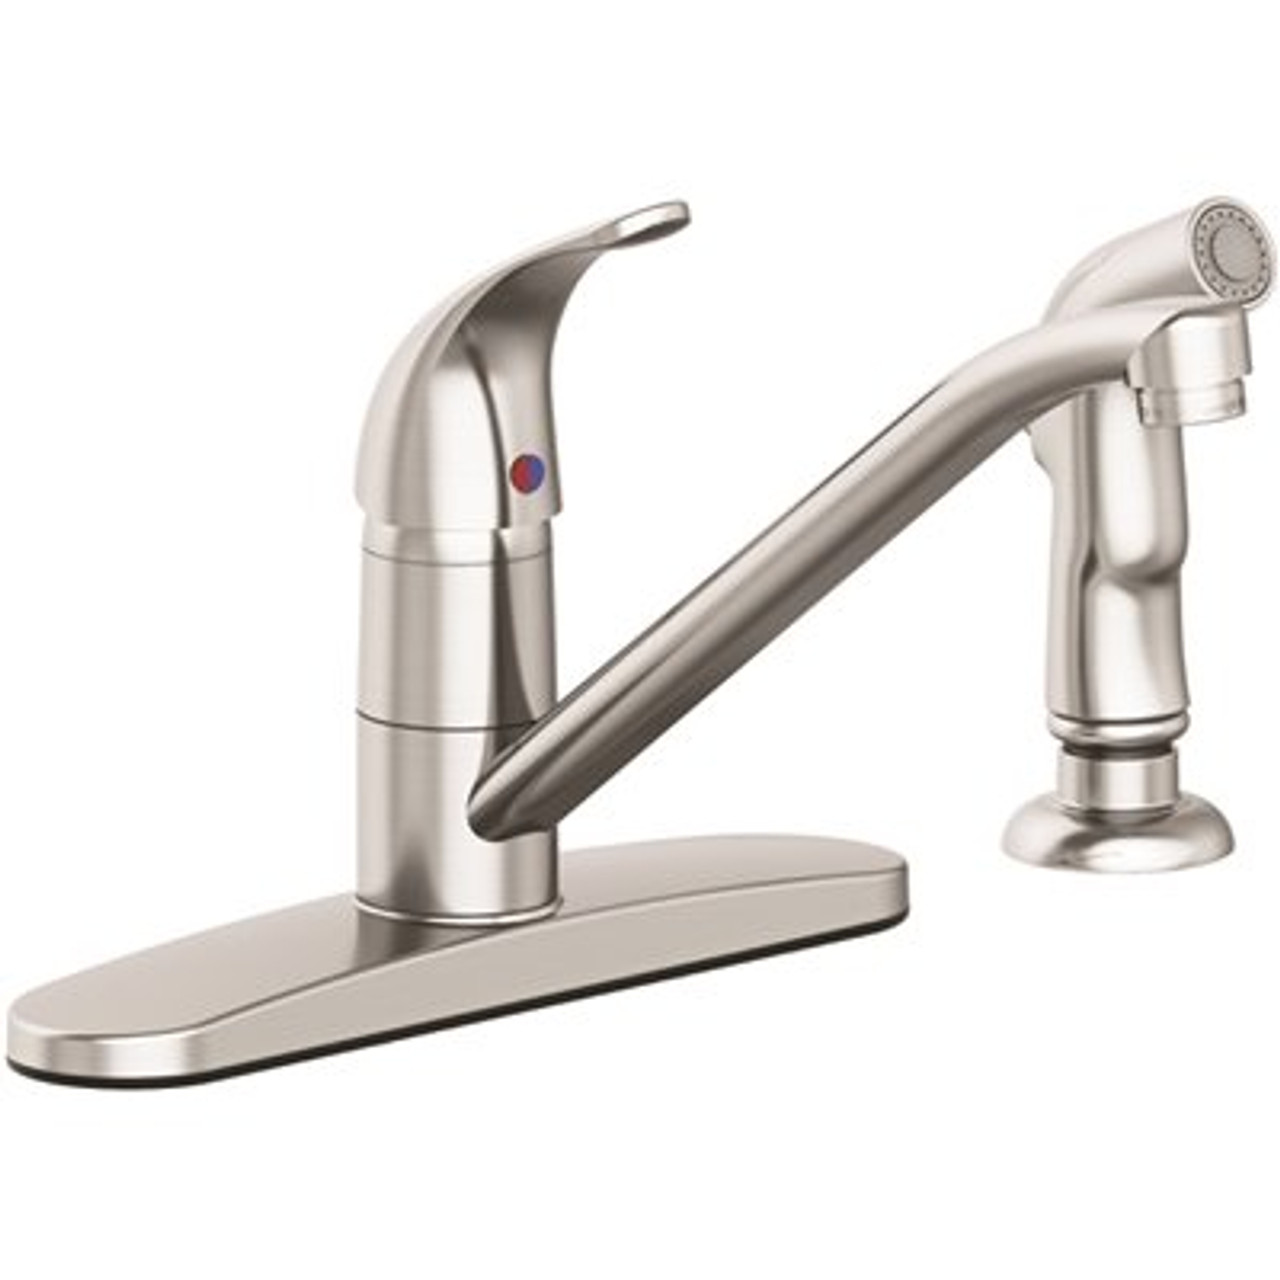 Seasons Westlake Single-Handle Standard Kitchen Faucet with Side Spray in Stainless Steel